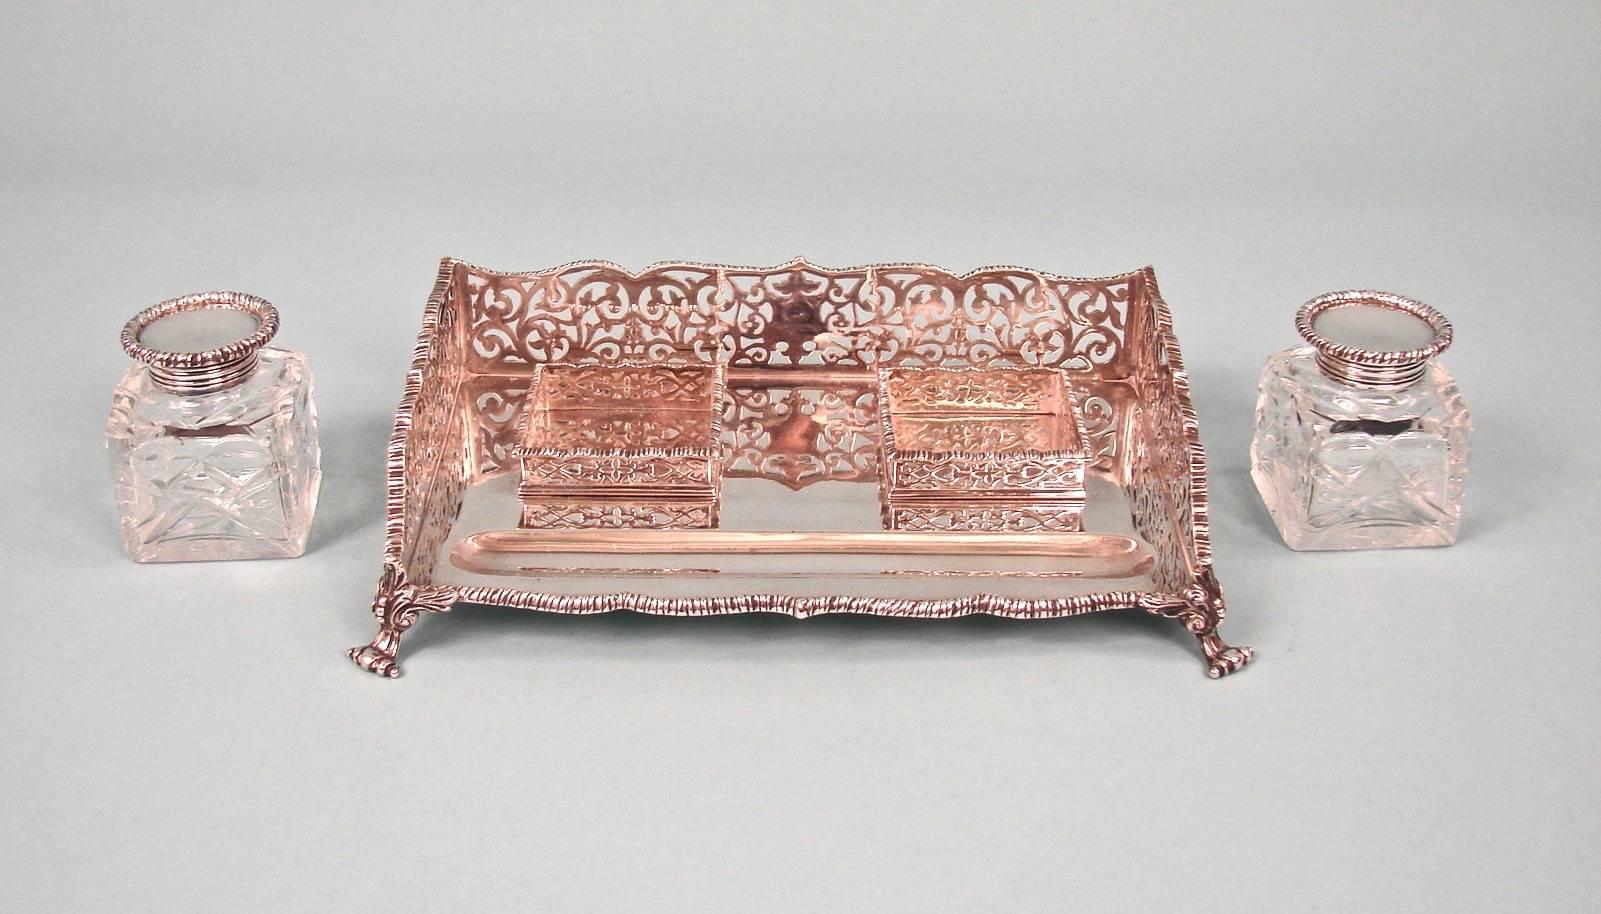 Late 19th Century English Sterling Silver Standish with Two Cut-Glass Inkwells